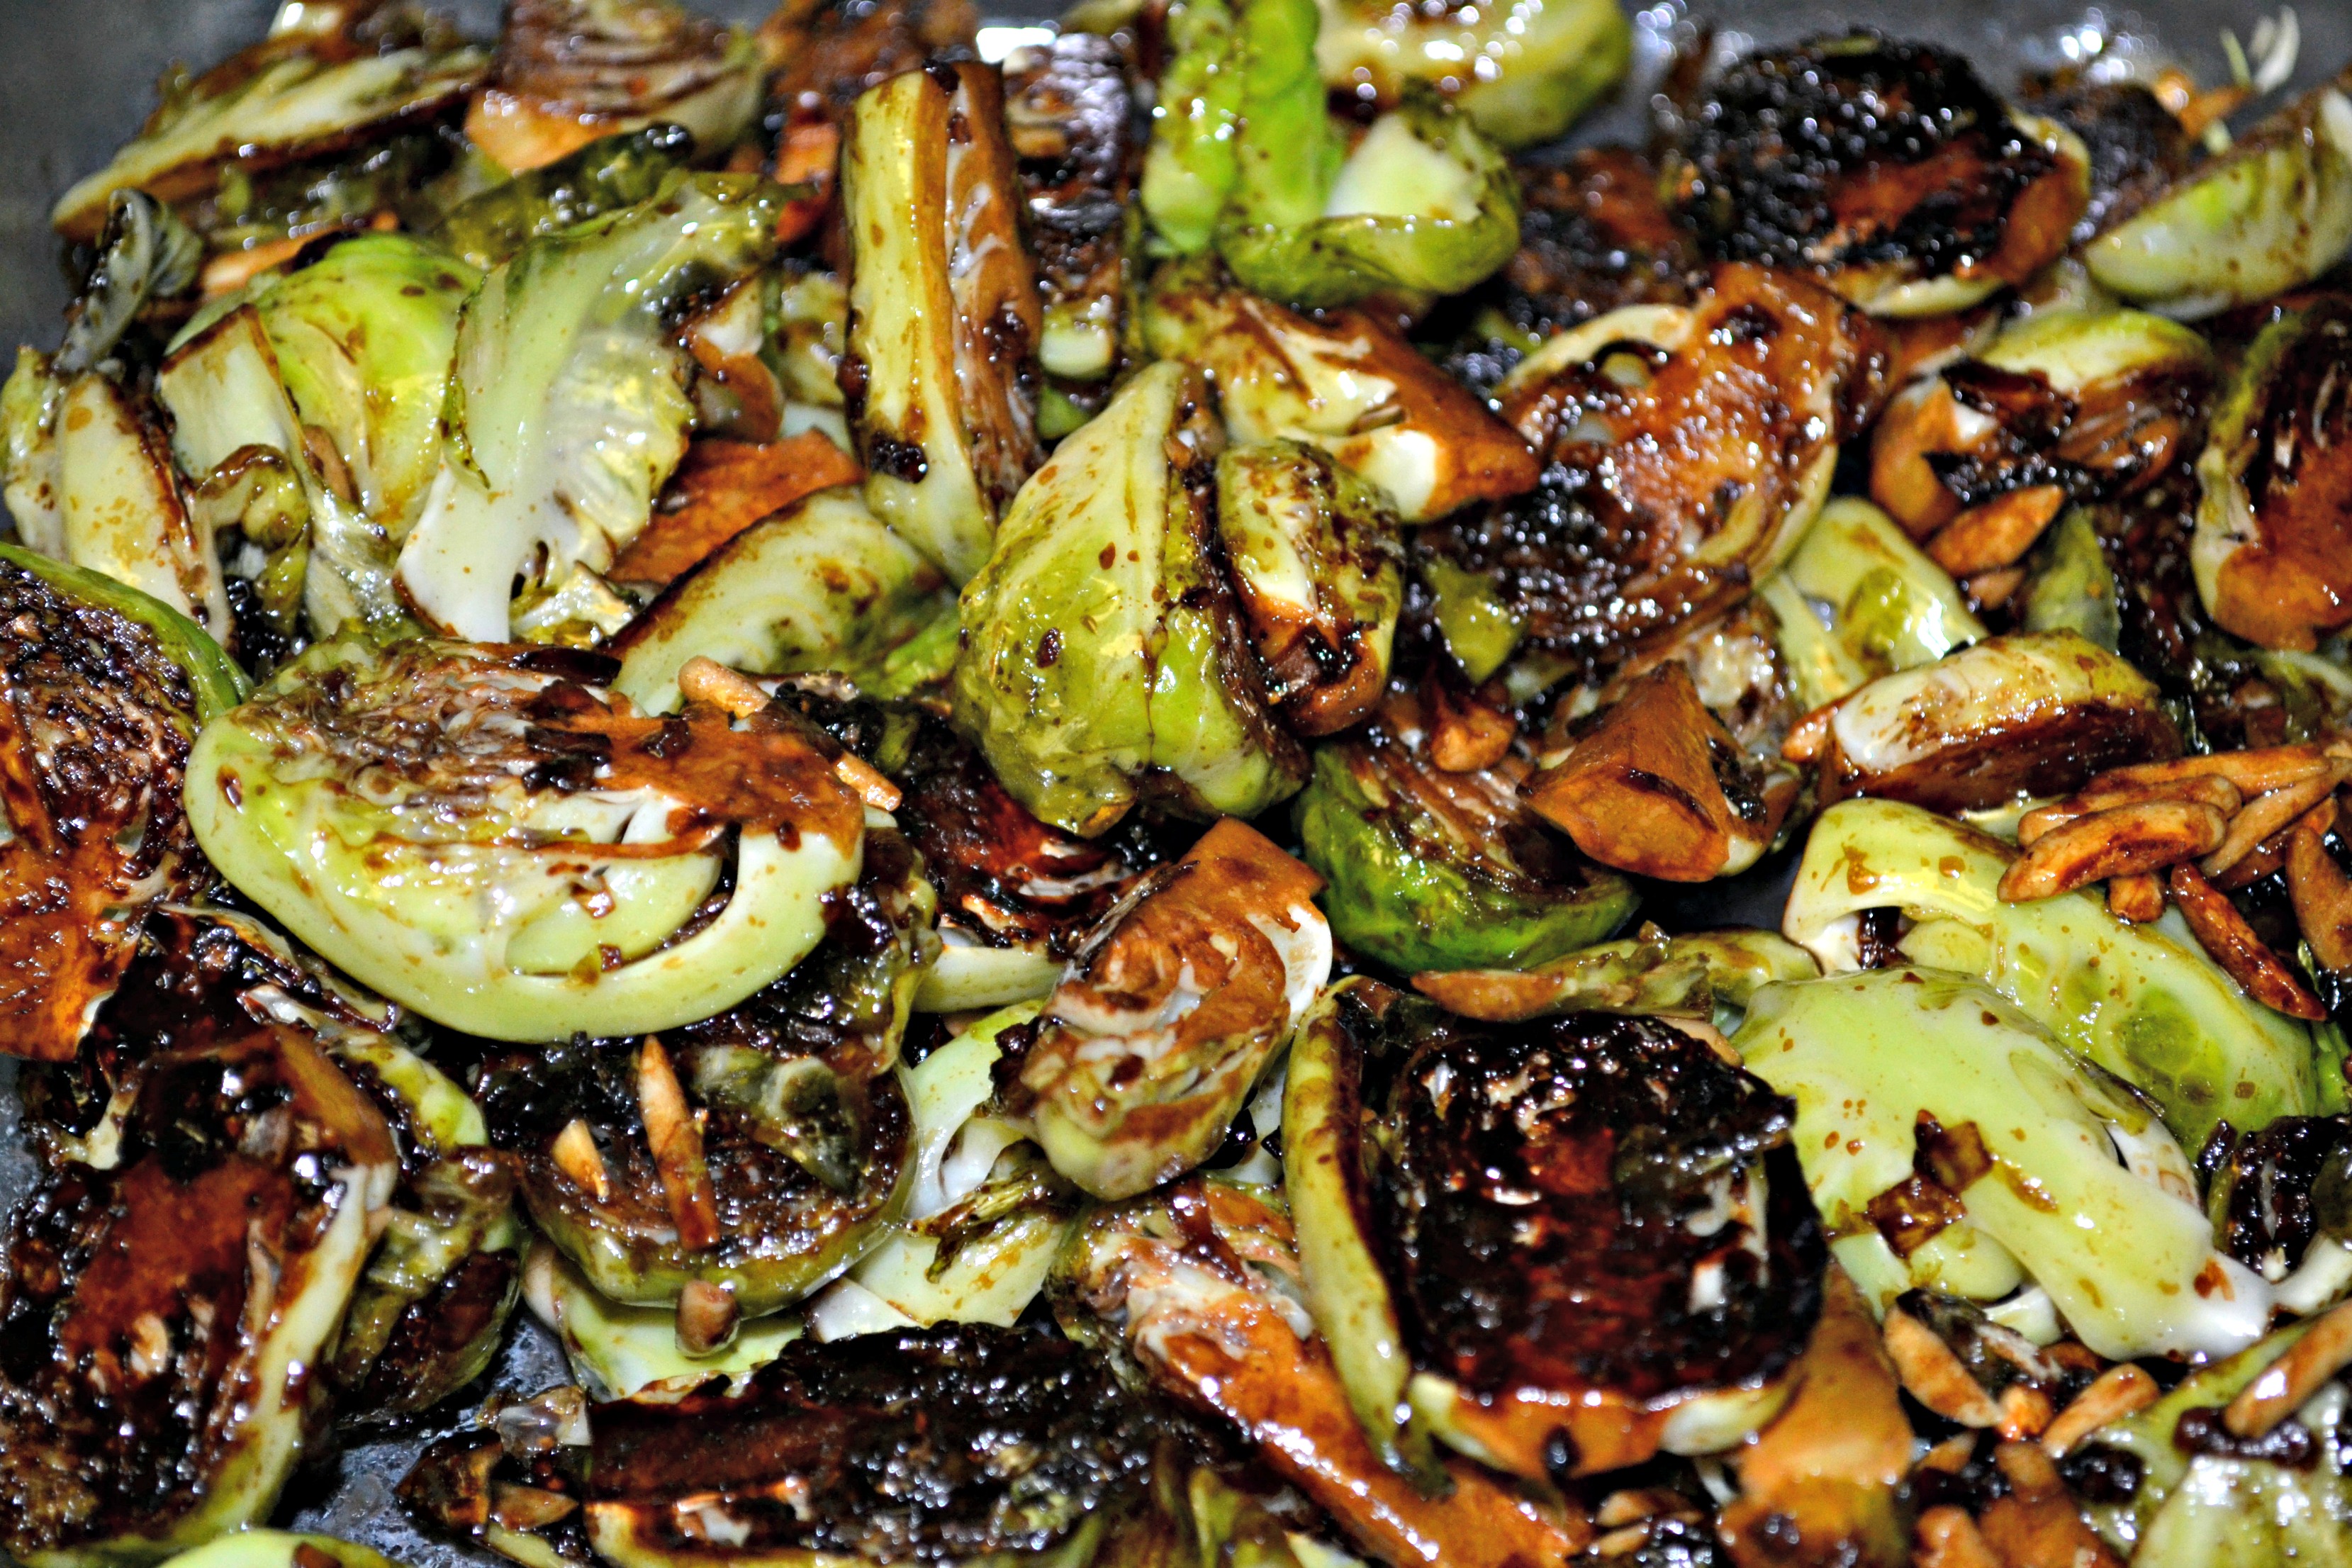 Brussels Sprouts with Smoked Balsamic Vinegar, Shallots and Slivered Almonds